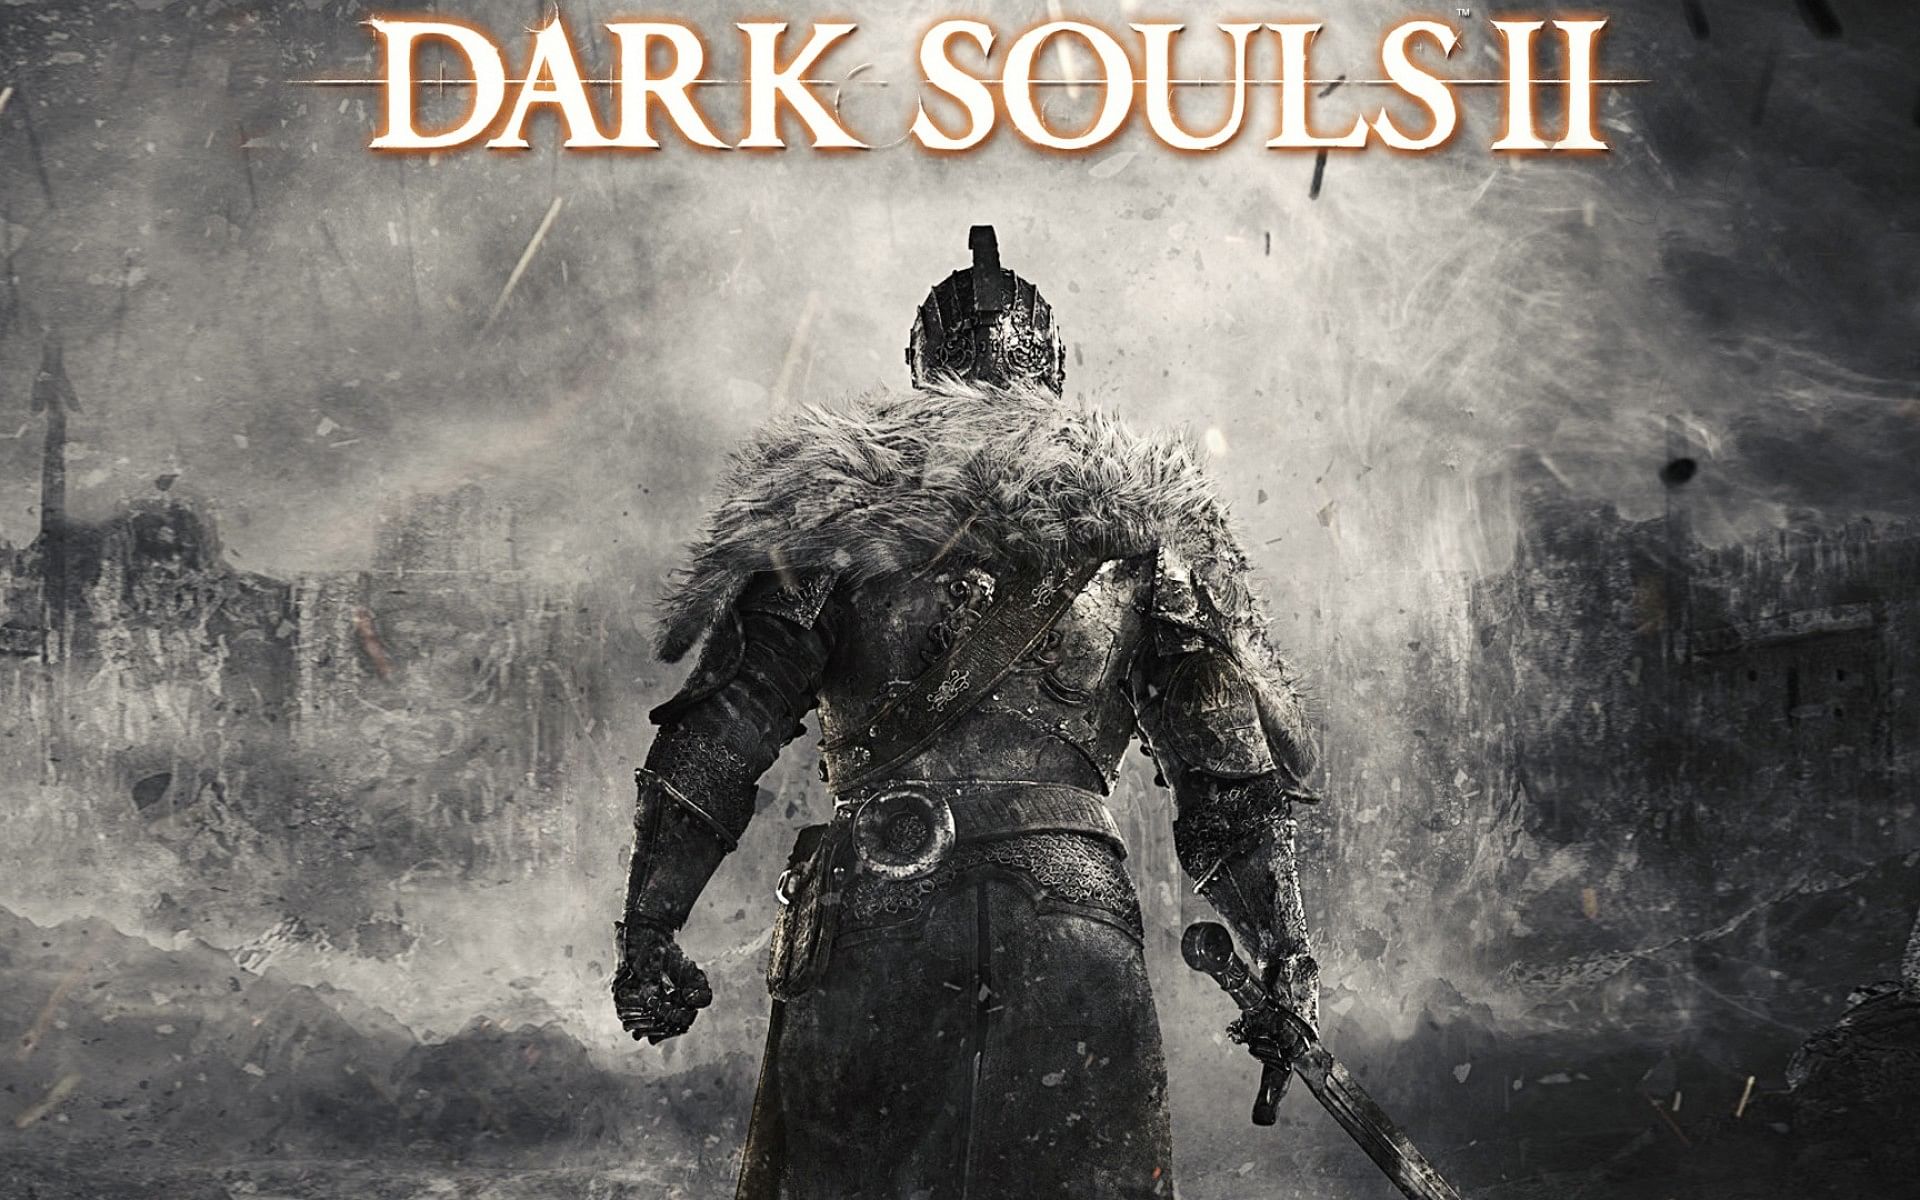 dark-souls-ii-scholar-of-the-first-sin-edition-arrives-april-2nd